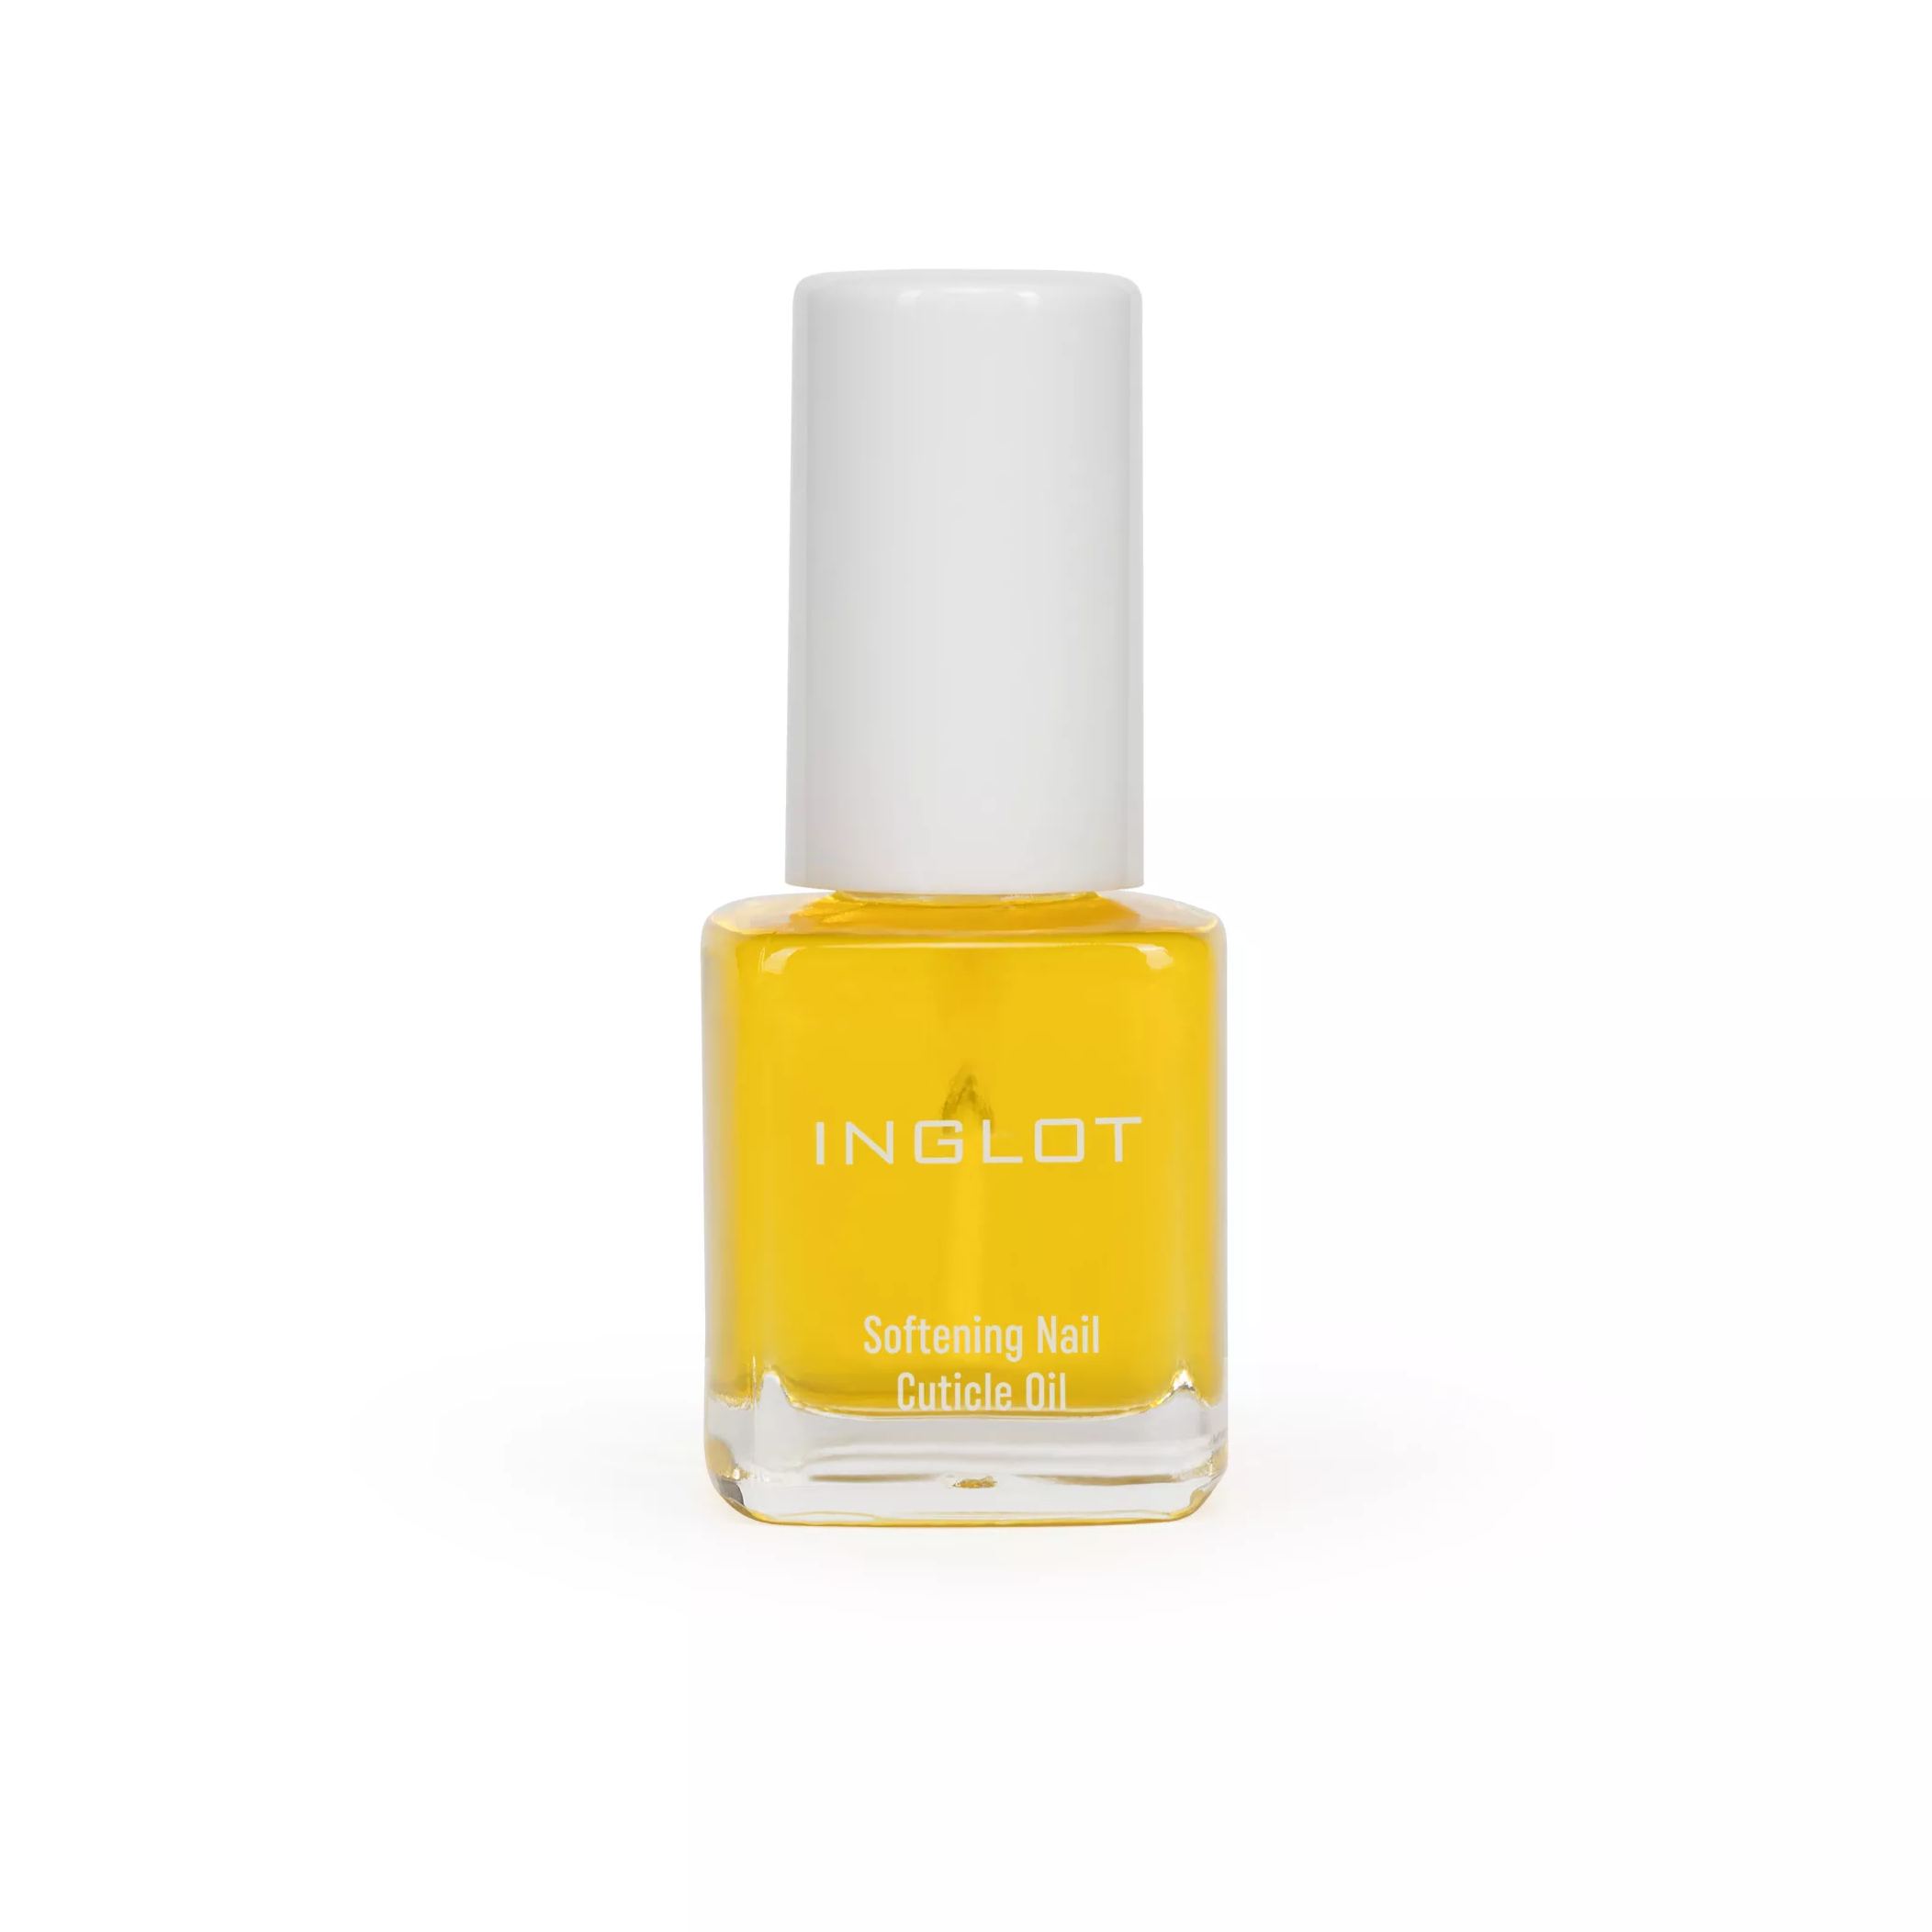 Softening Nail Cuticle Oil